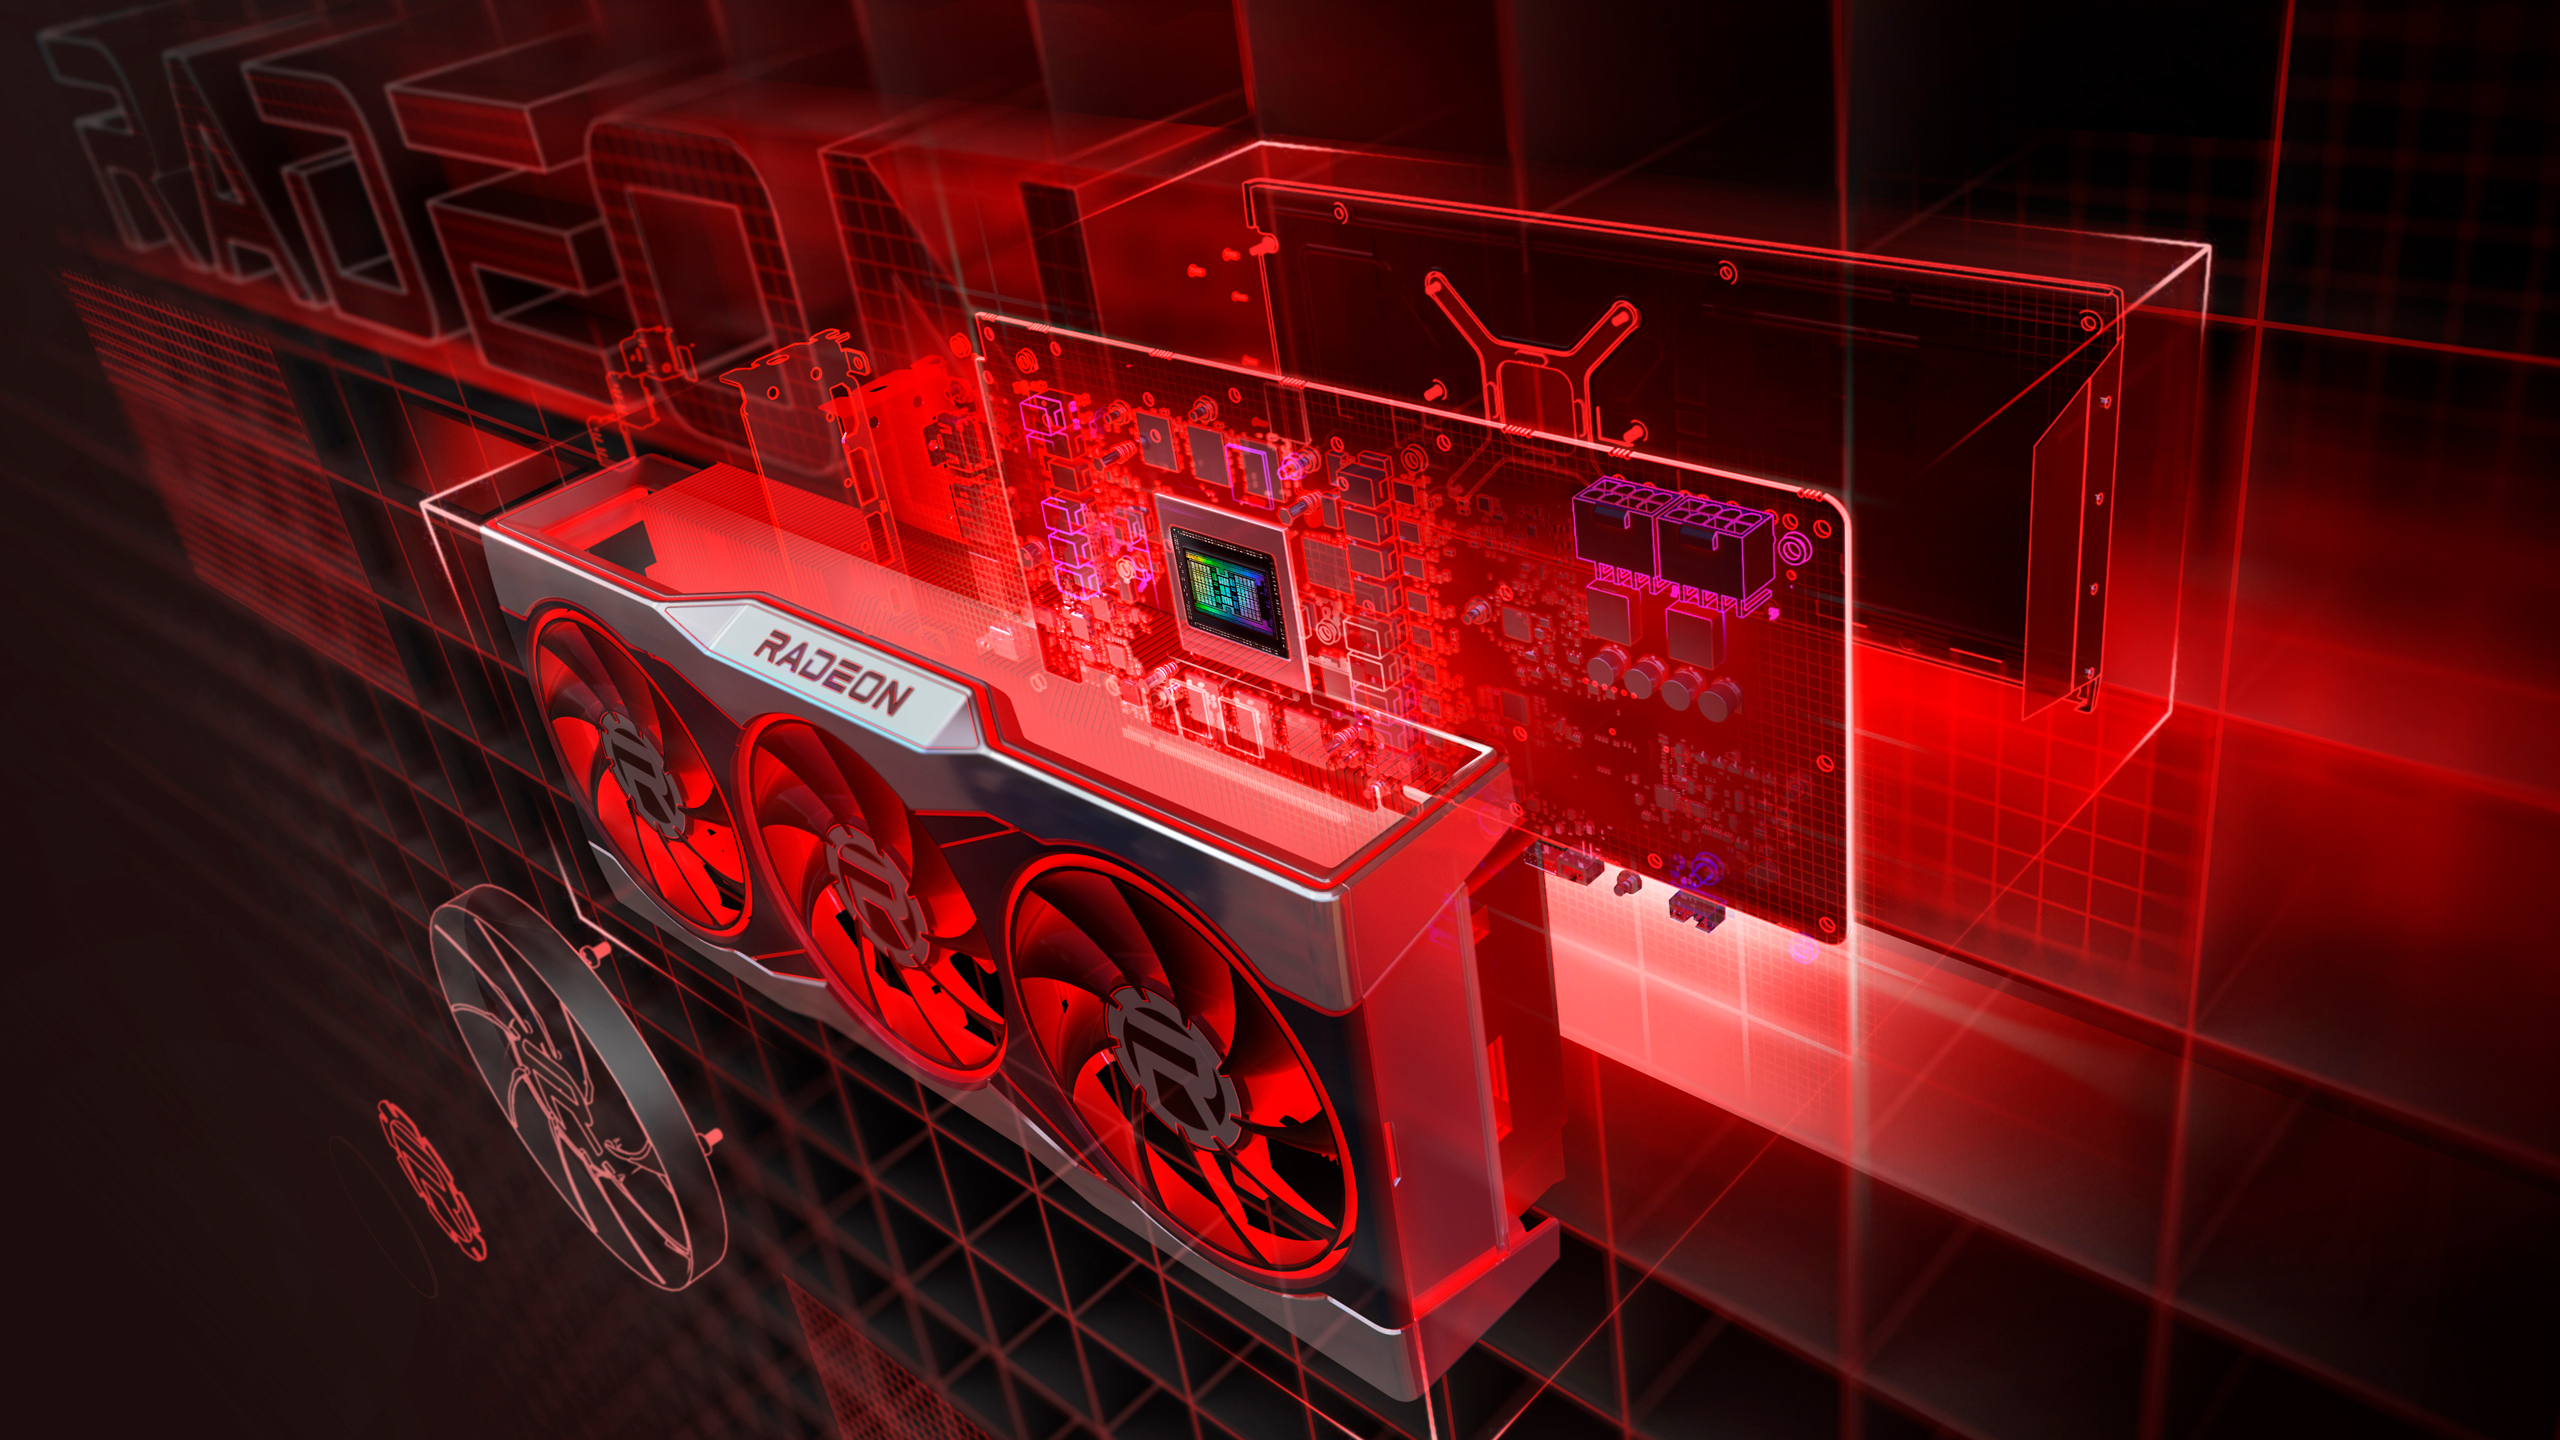 AMD Radeon Preview Driver Delivers Major Performance Boost in Early Testing